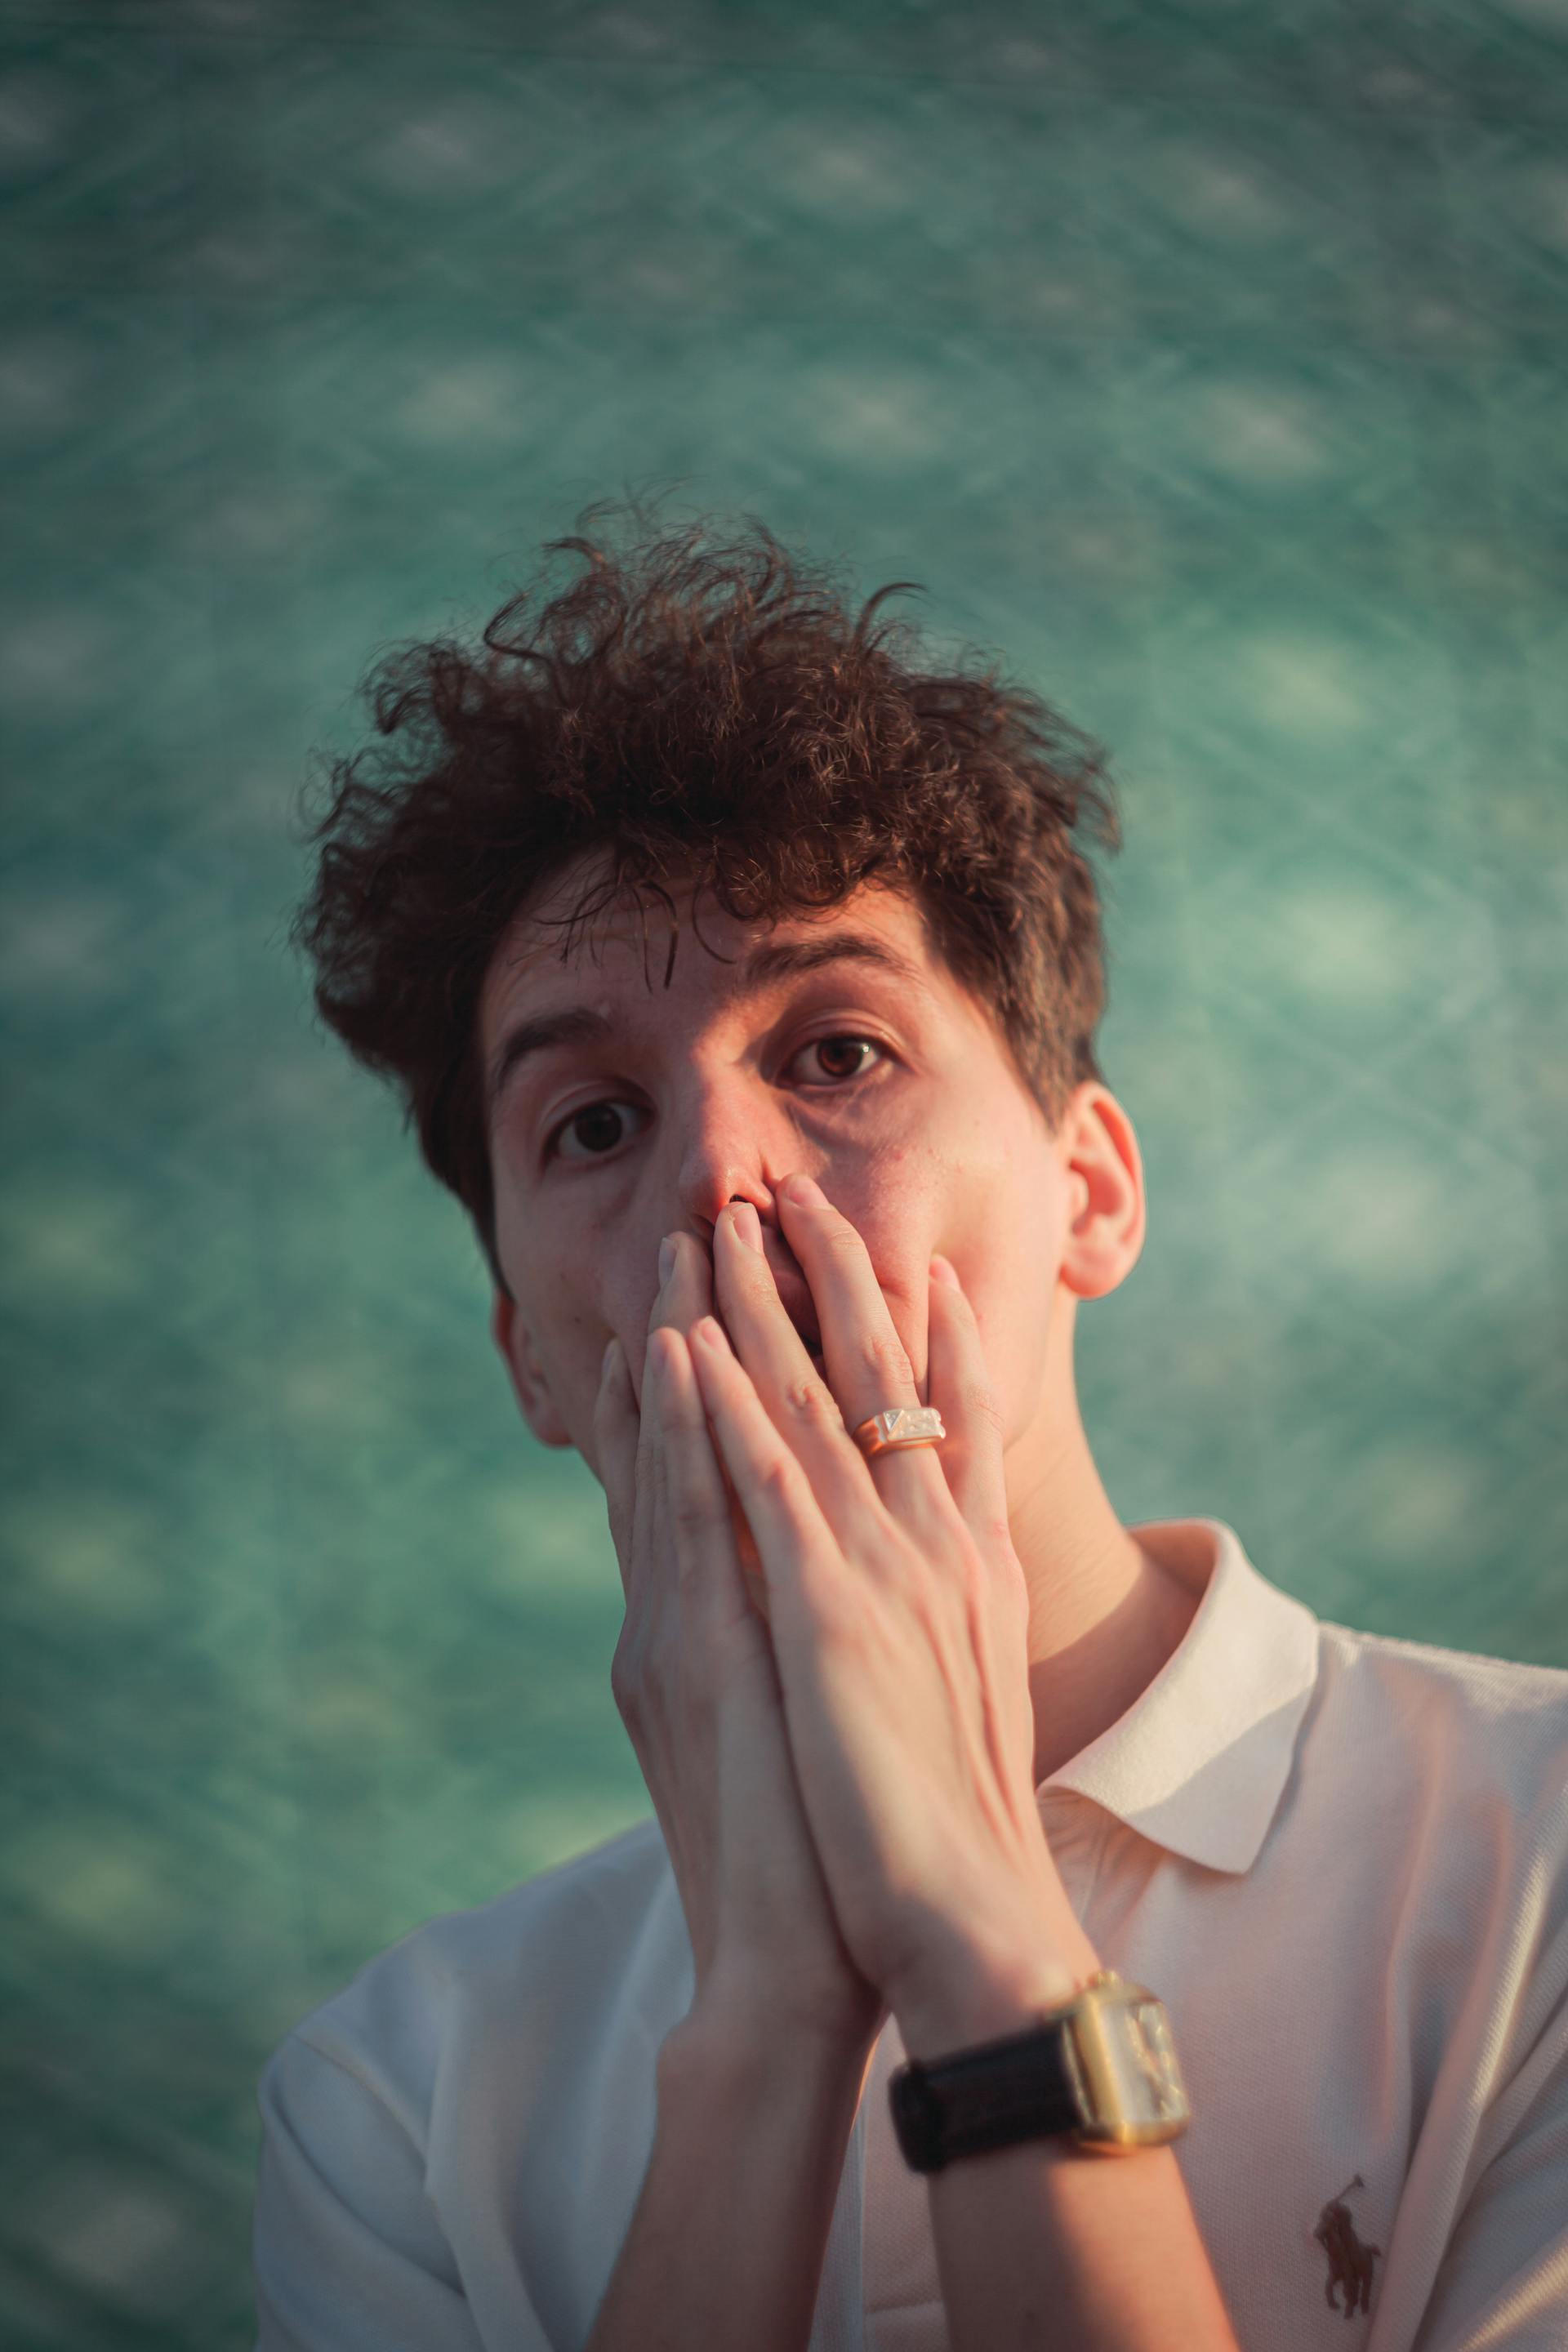 A man covering his mouth with both hands | Source: Pexels